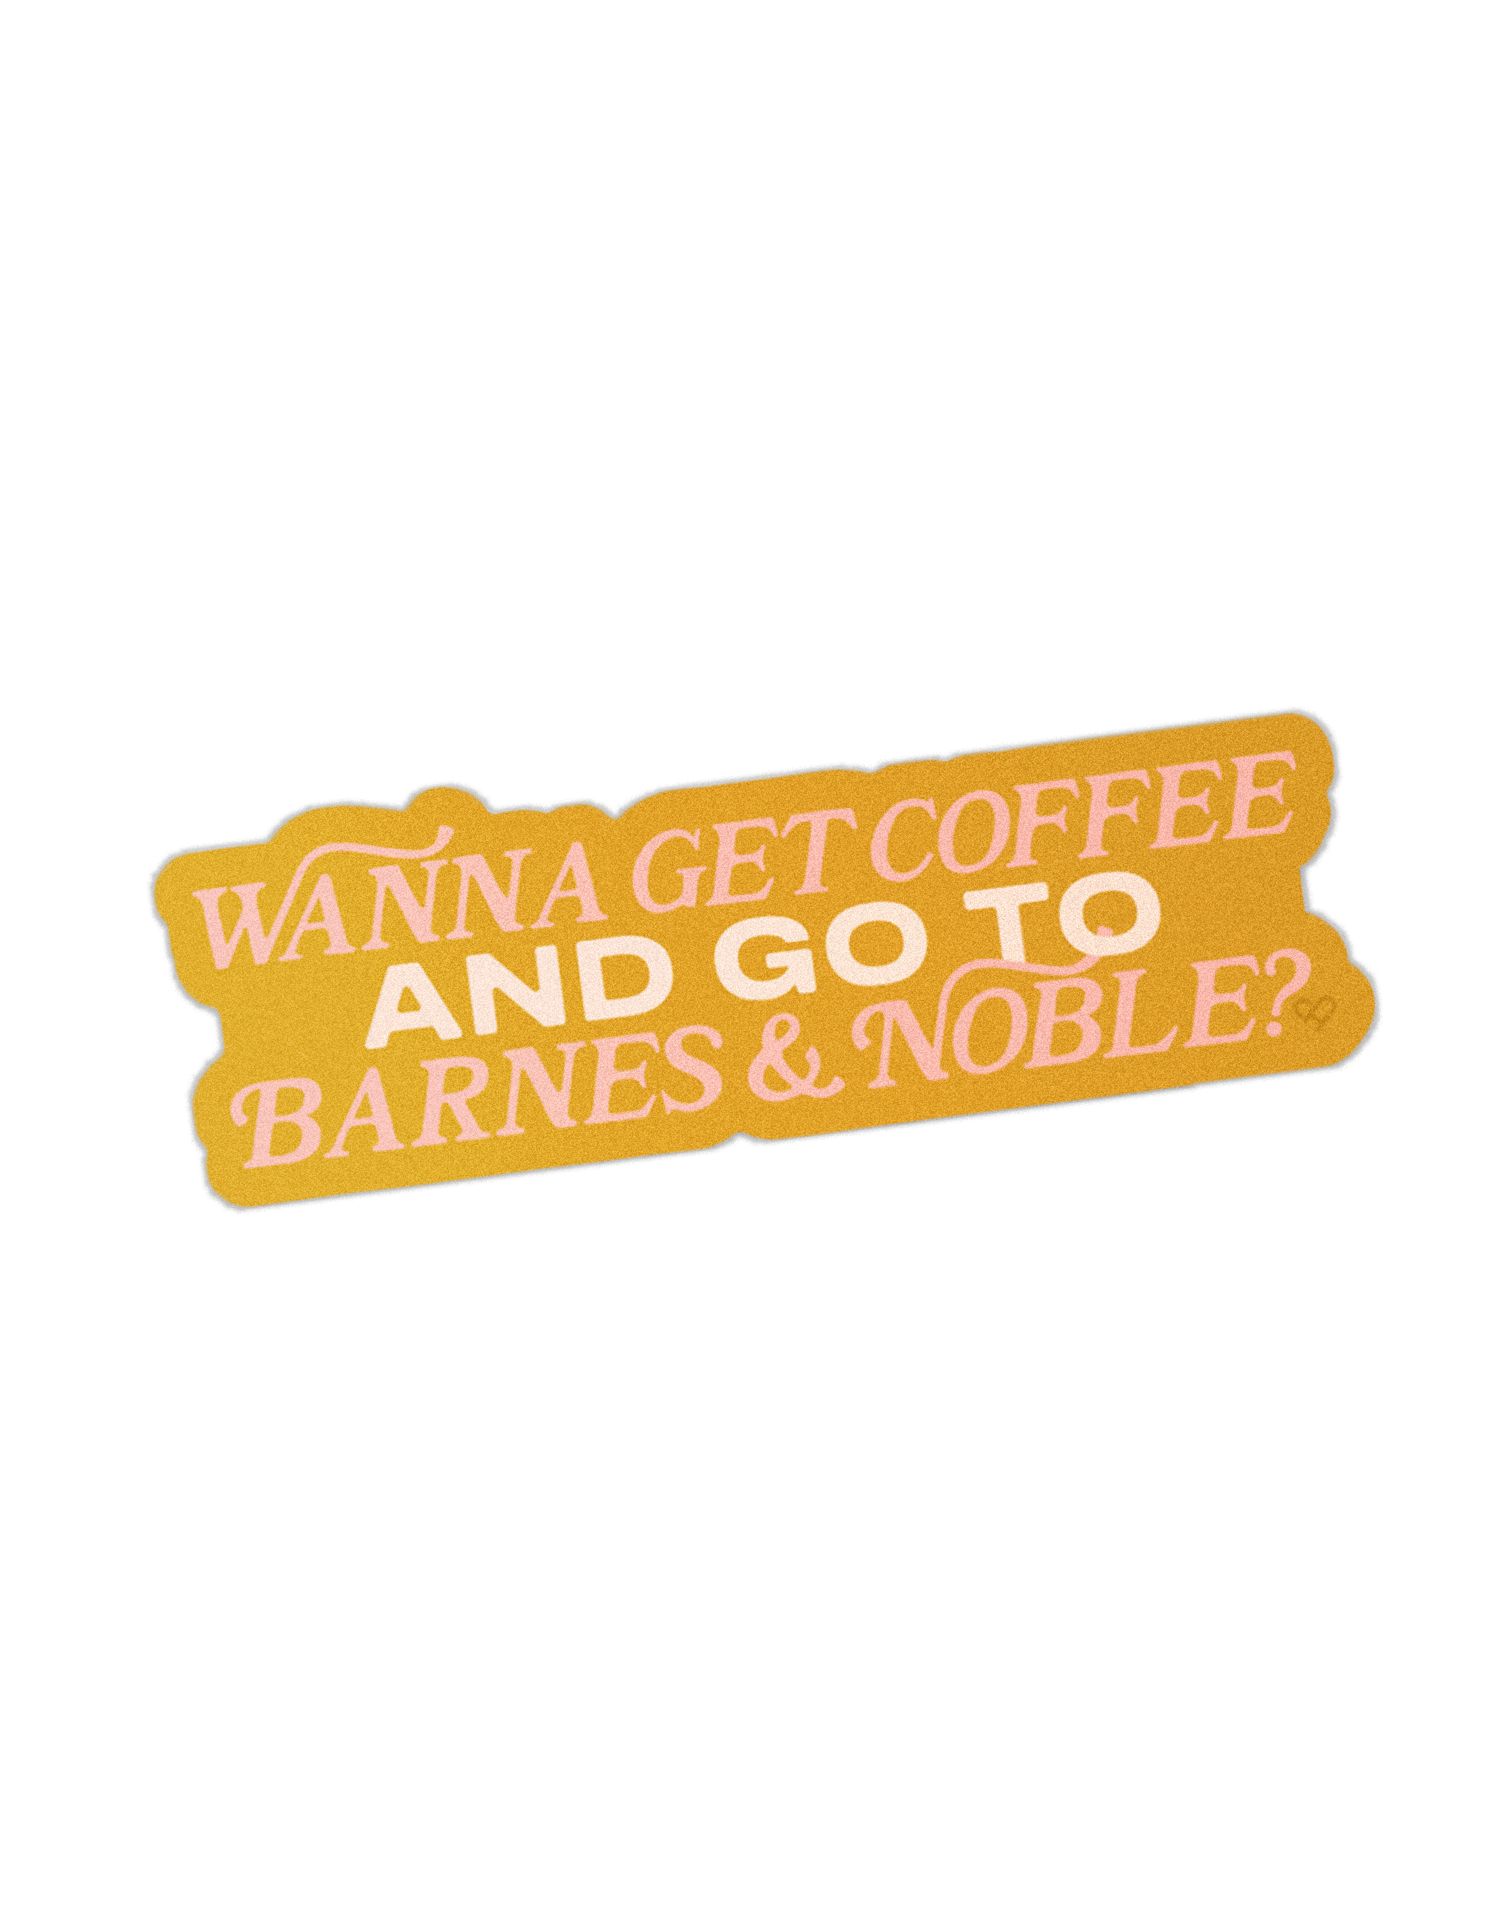 Wanna Get Coffee And Go To Barnes & Noble Sticker